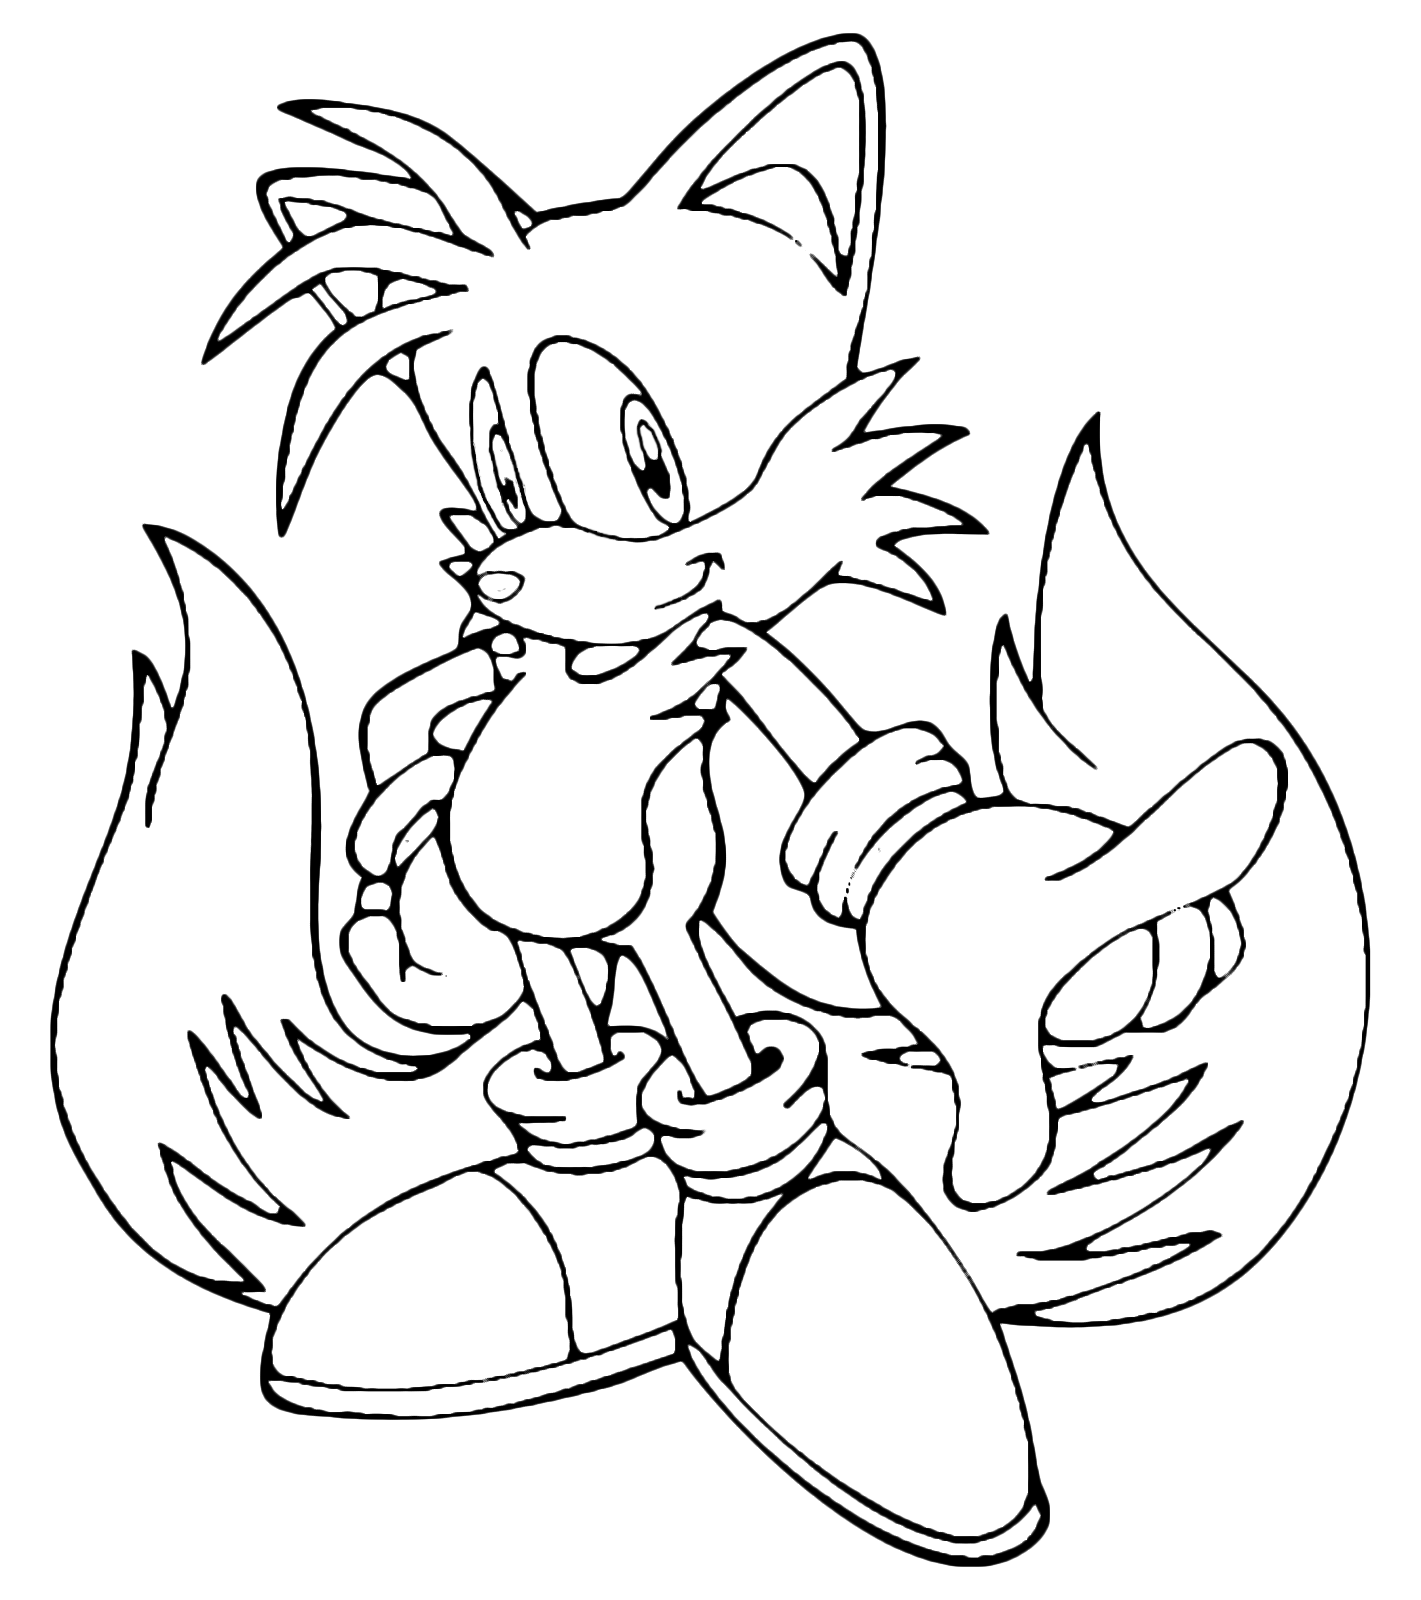 Sonic s friend Knuckles Sonic the Hedgehog Kids Coloring Pages